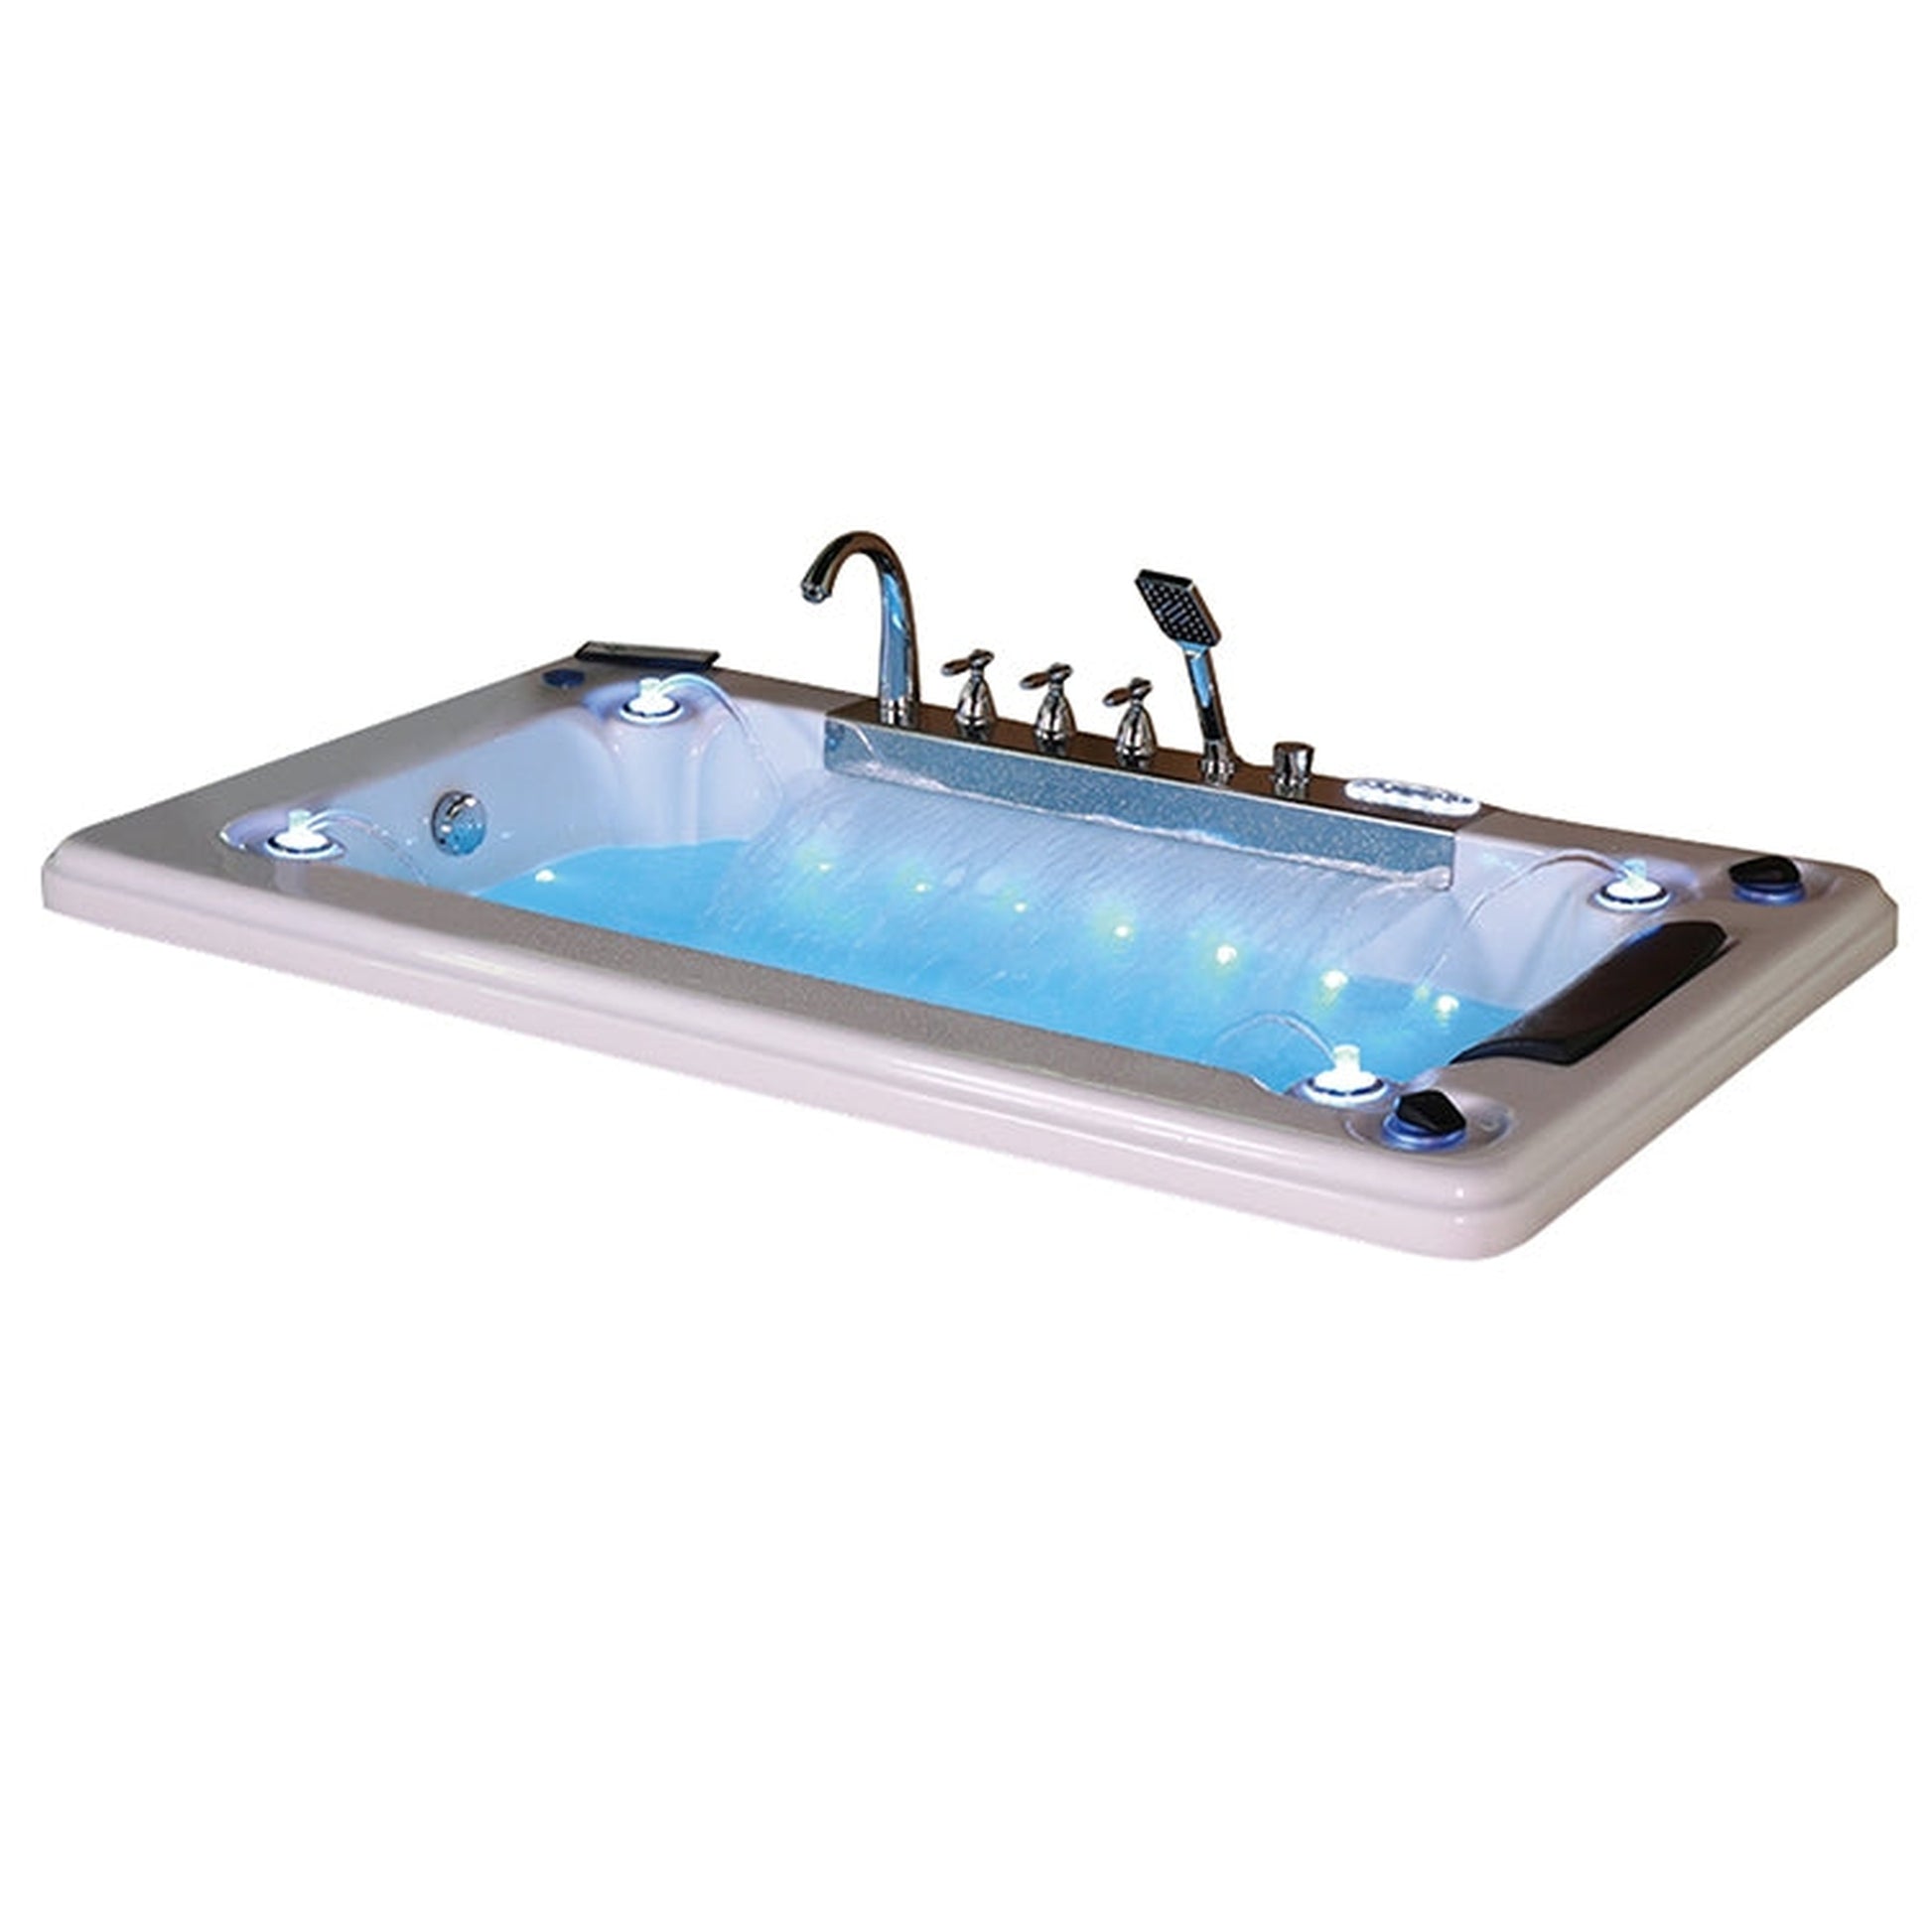 Fontana Sierra 75" x 43" 1-Person White Rectangular Drop-In Freestanding Combo Massage Indoor and Outdoor Acrylic Bathtub With Massage Jet and Bubble LED Multicolor Light